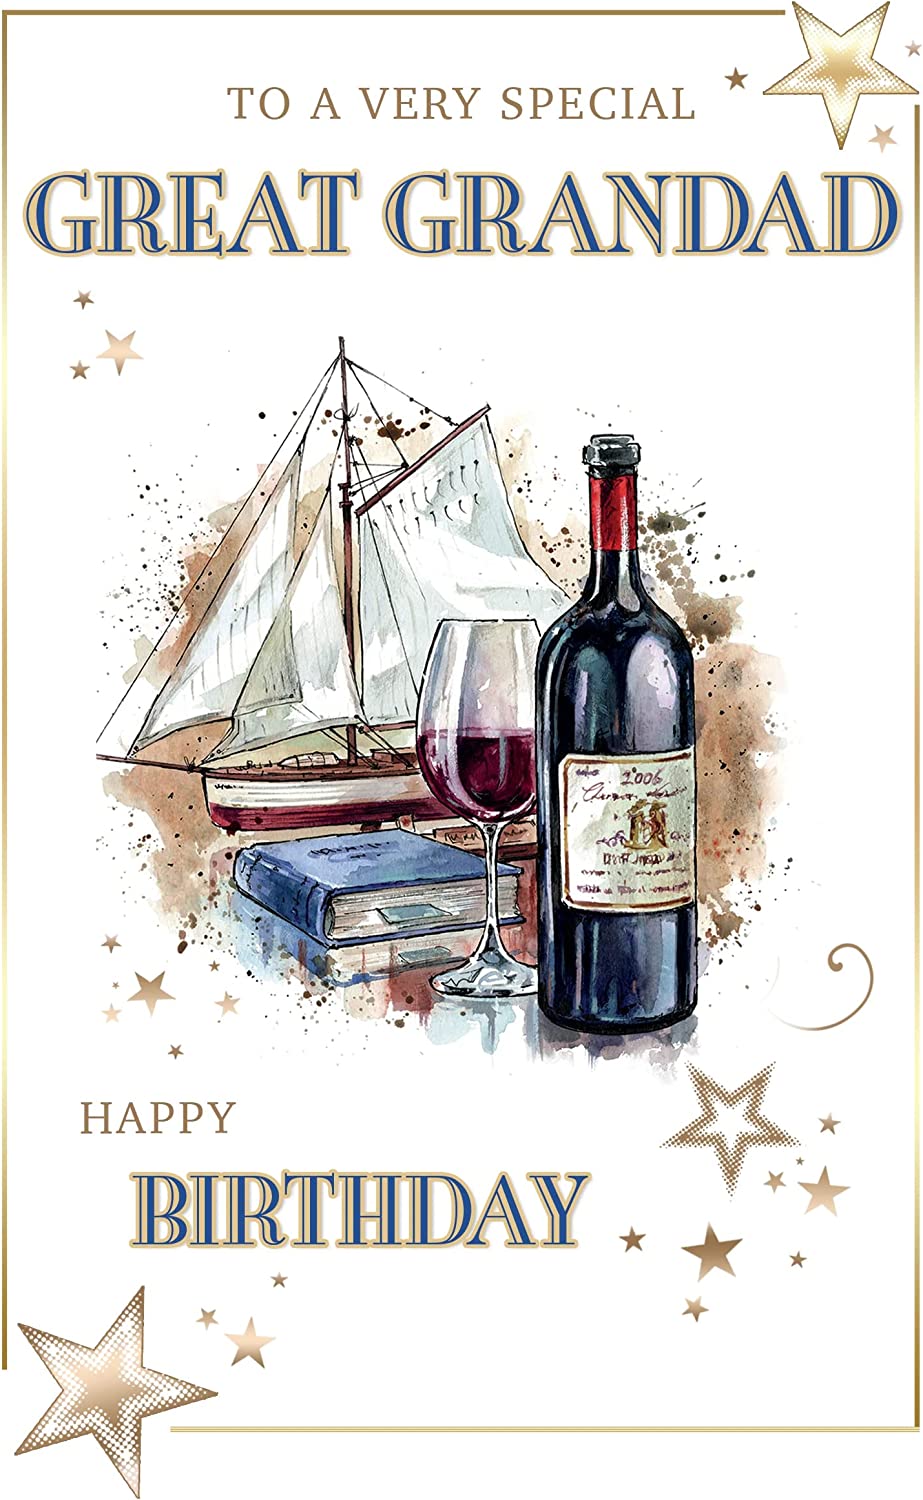 Great-Granddad Birthday Card - Boating, Wine and Books